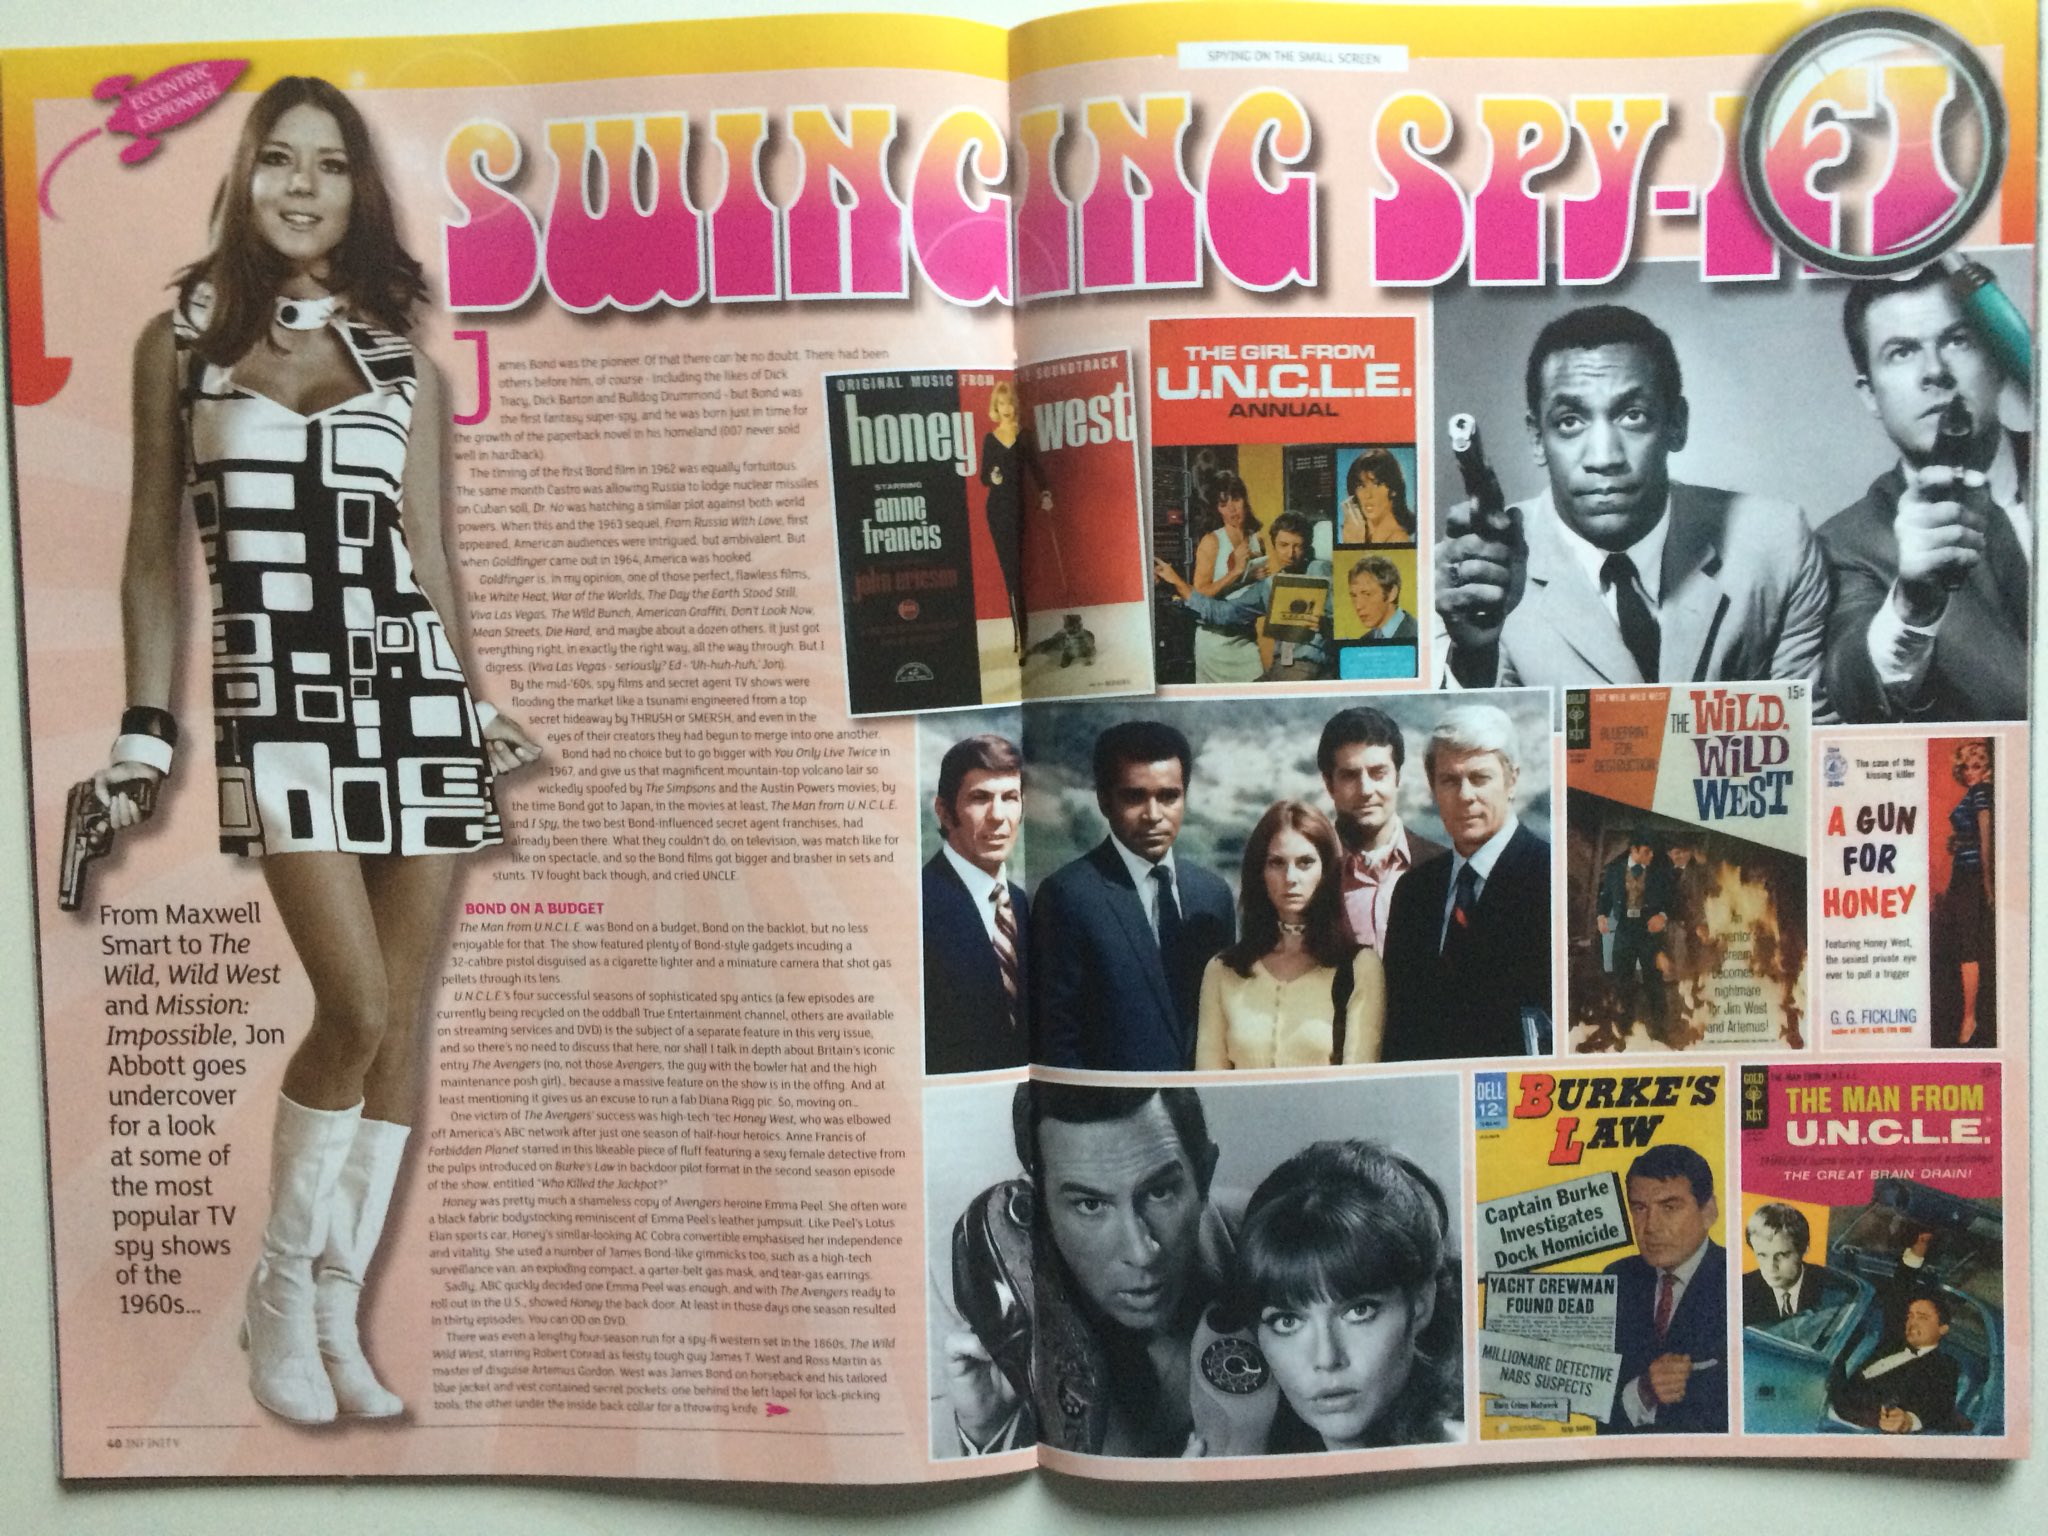 Claus Grimm Swinging Spy Fi A Look At Some Popular Tv Spy Shows Of The 1960s In Uk Magazine Infinity Issue 3 July 17 Spyfi Theavengers Themanfromuncle Getsmart Honeywest Burkeslaw Wildwildwest